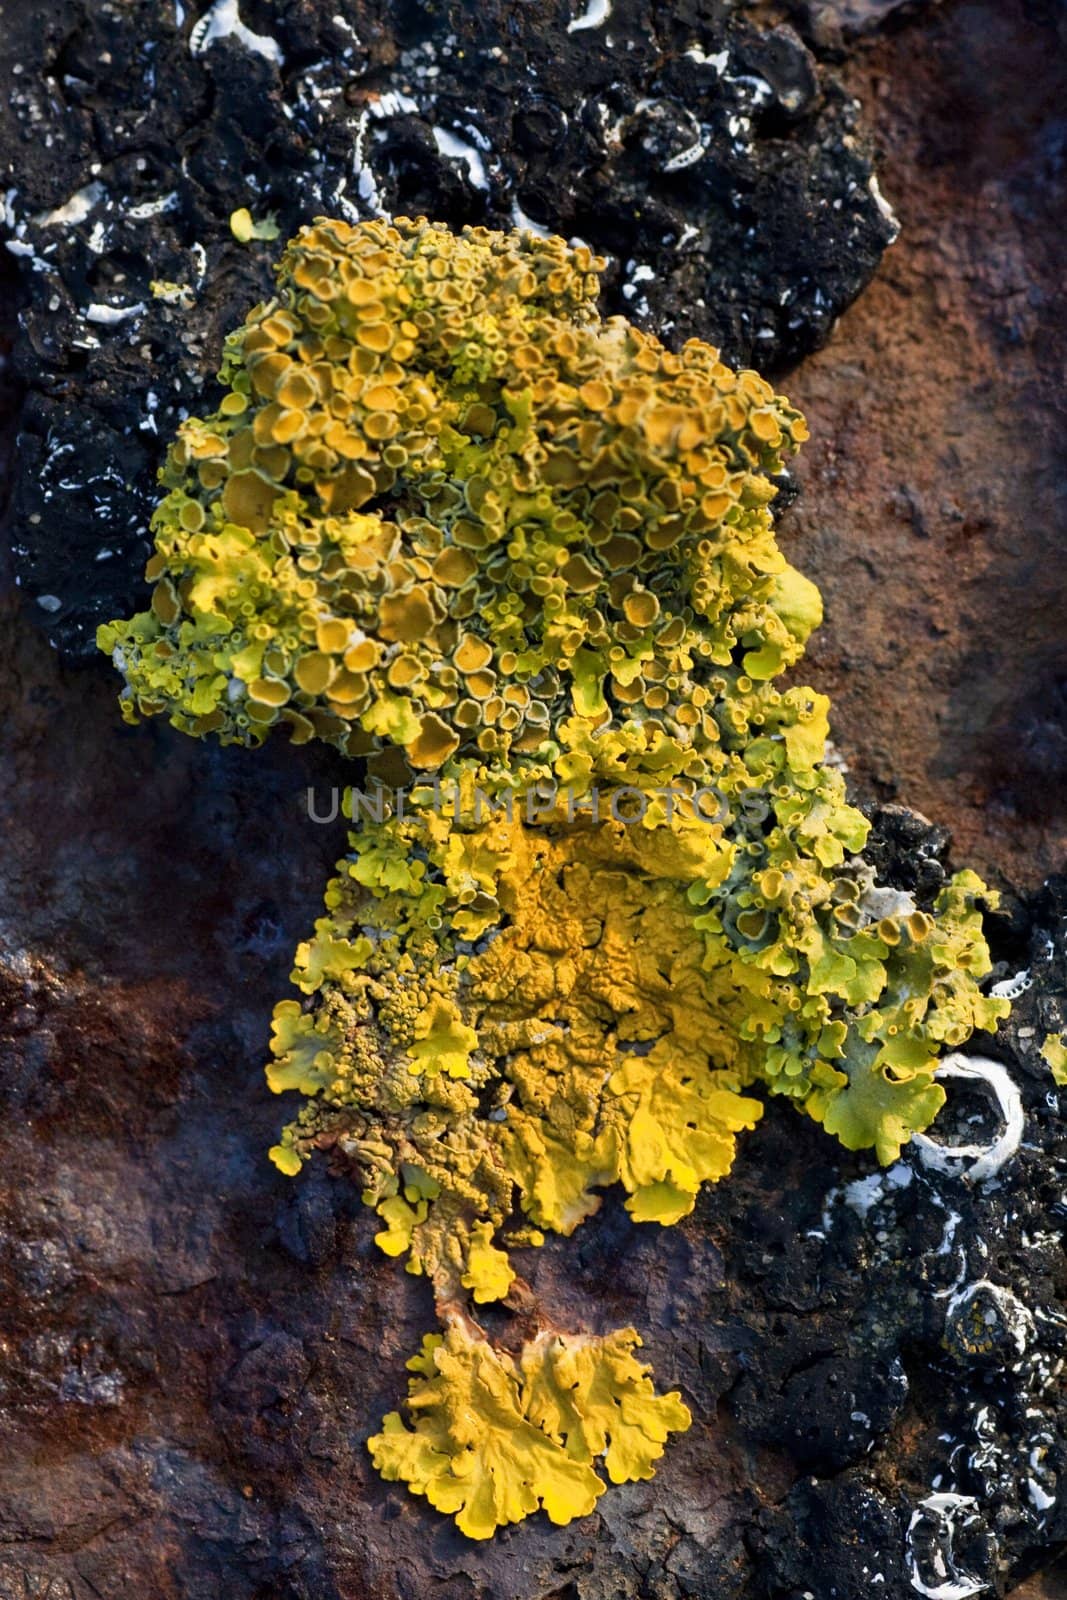 View of some yellow lichen growing on a piece of iron.